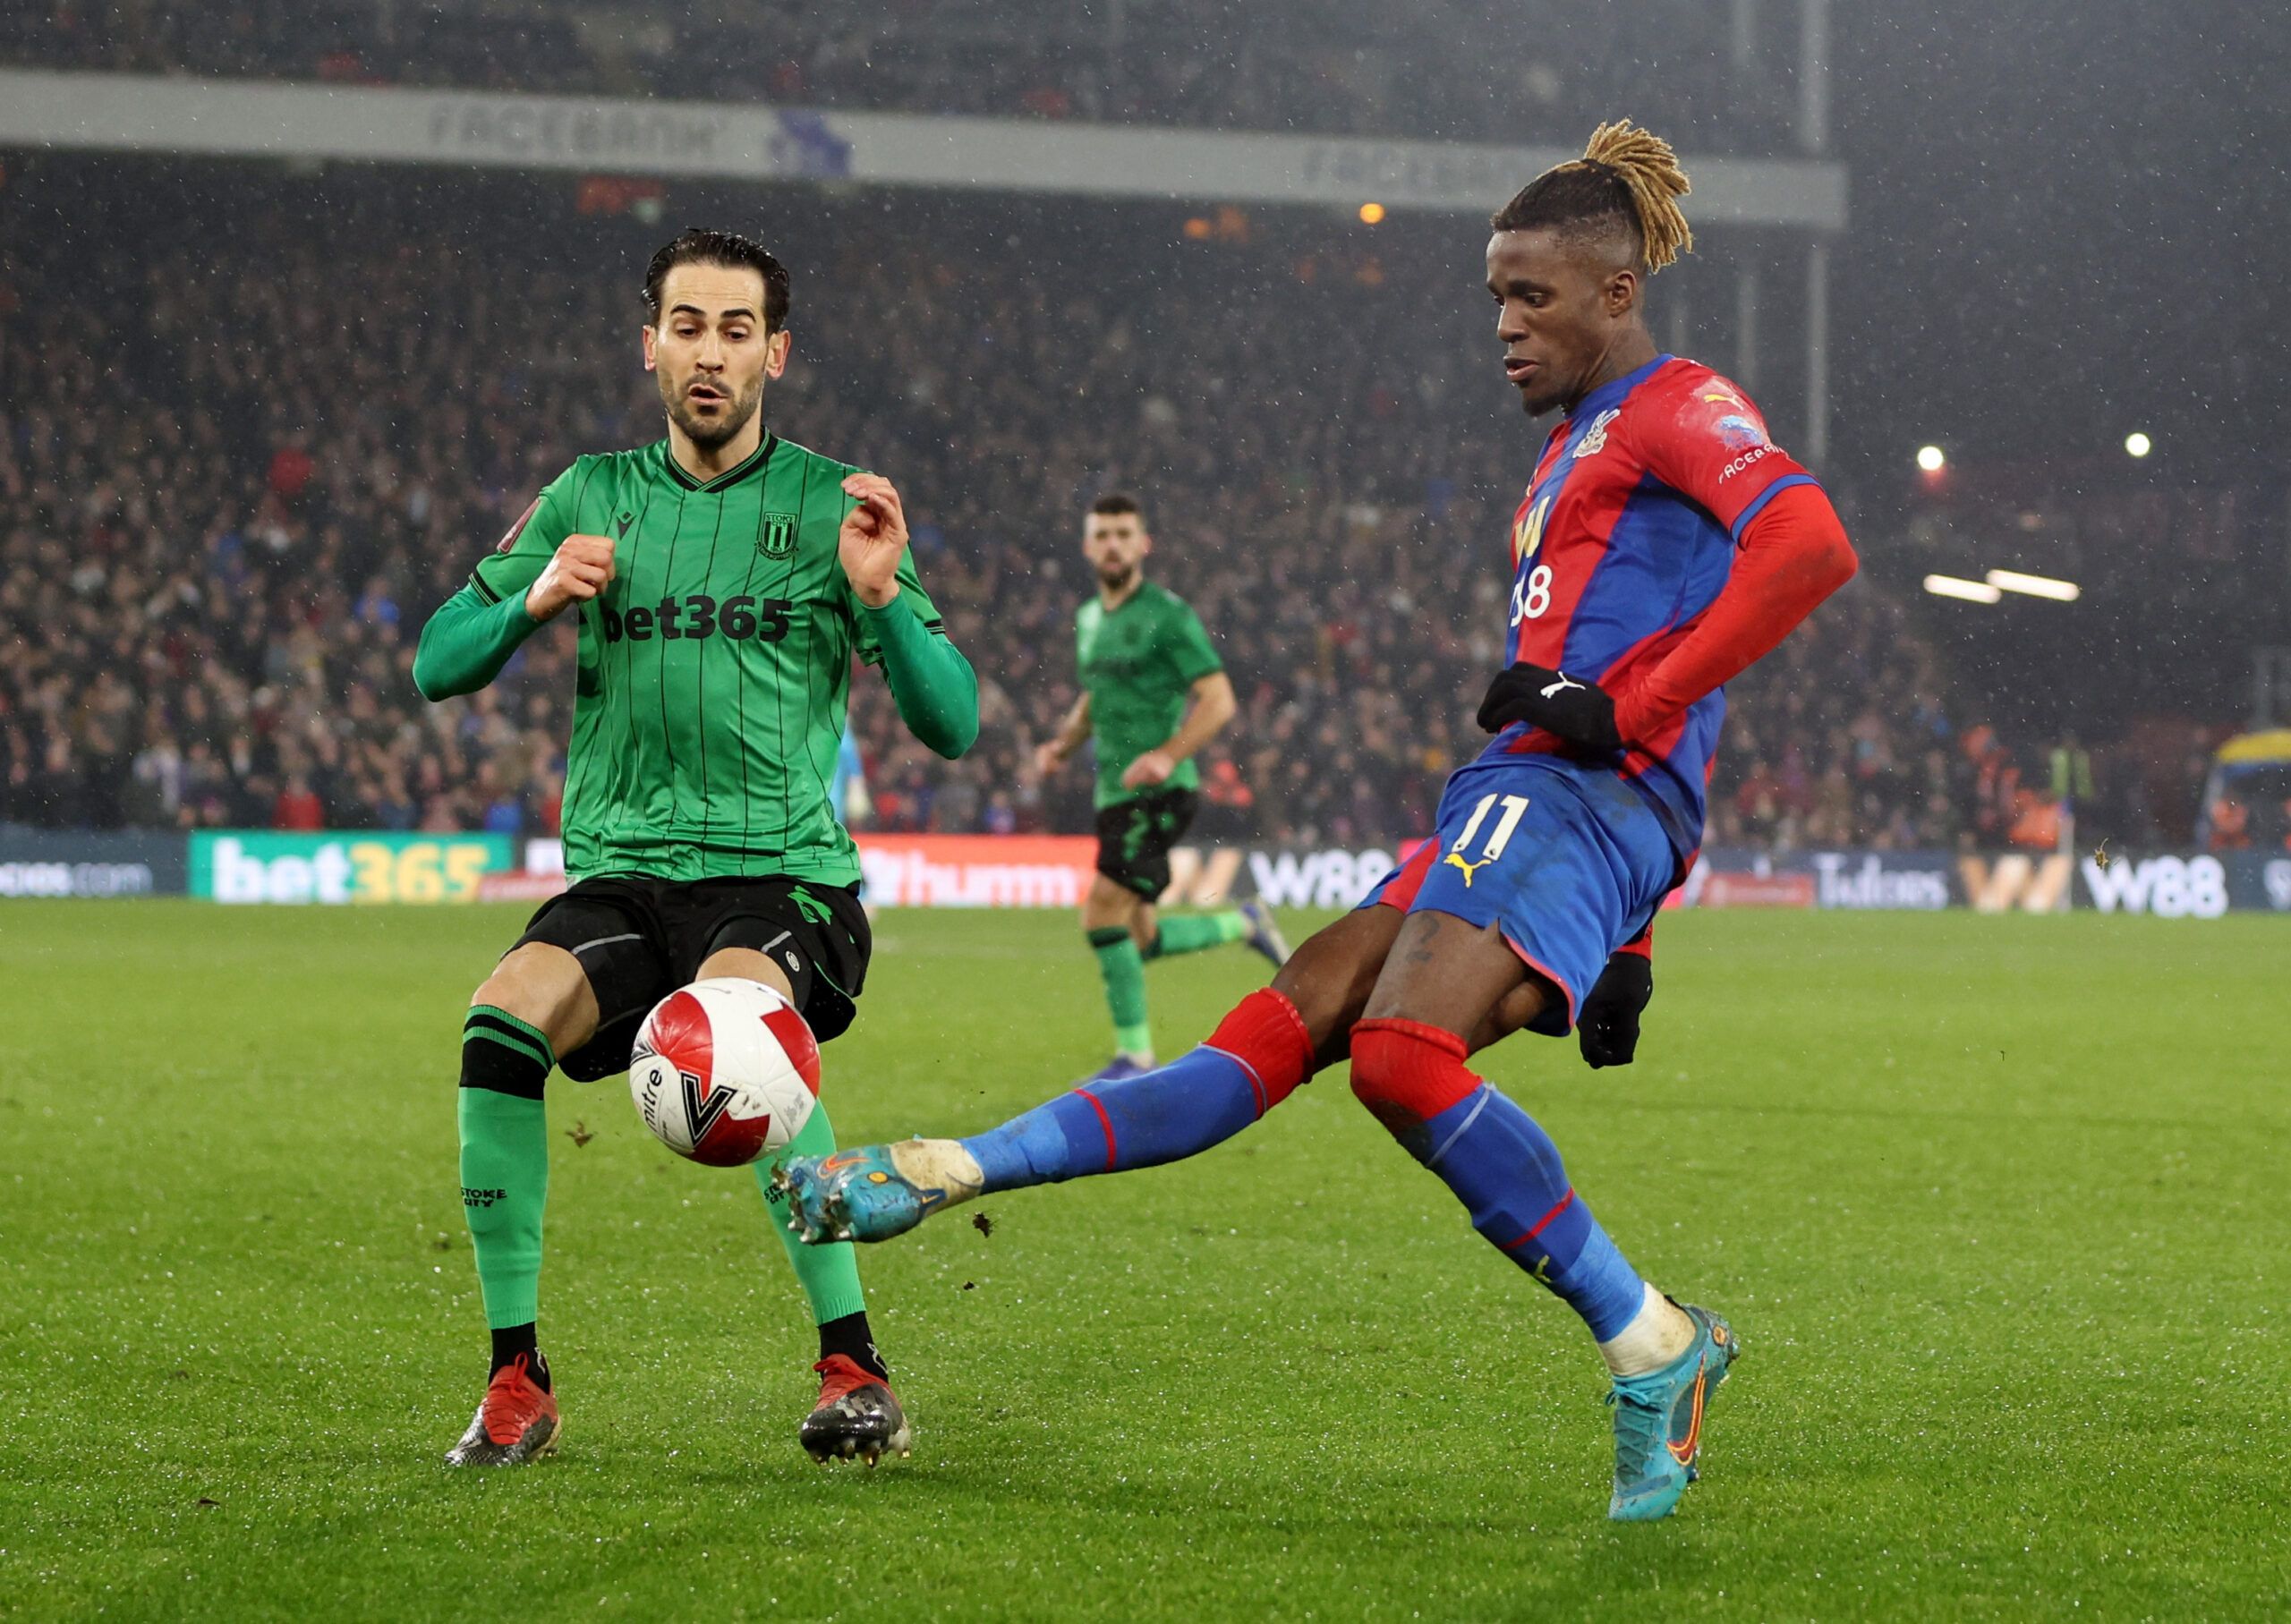 Soccer Football - FA Cup Fifth Round - Crystal Palace v Stoke City - Selhurst Park, London, Britain - March 1, 2022 Crystal Palace's Wilfried Zaha in action with Stoke City's Mario Vrancic Action Images via Reuters/Paul Childs